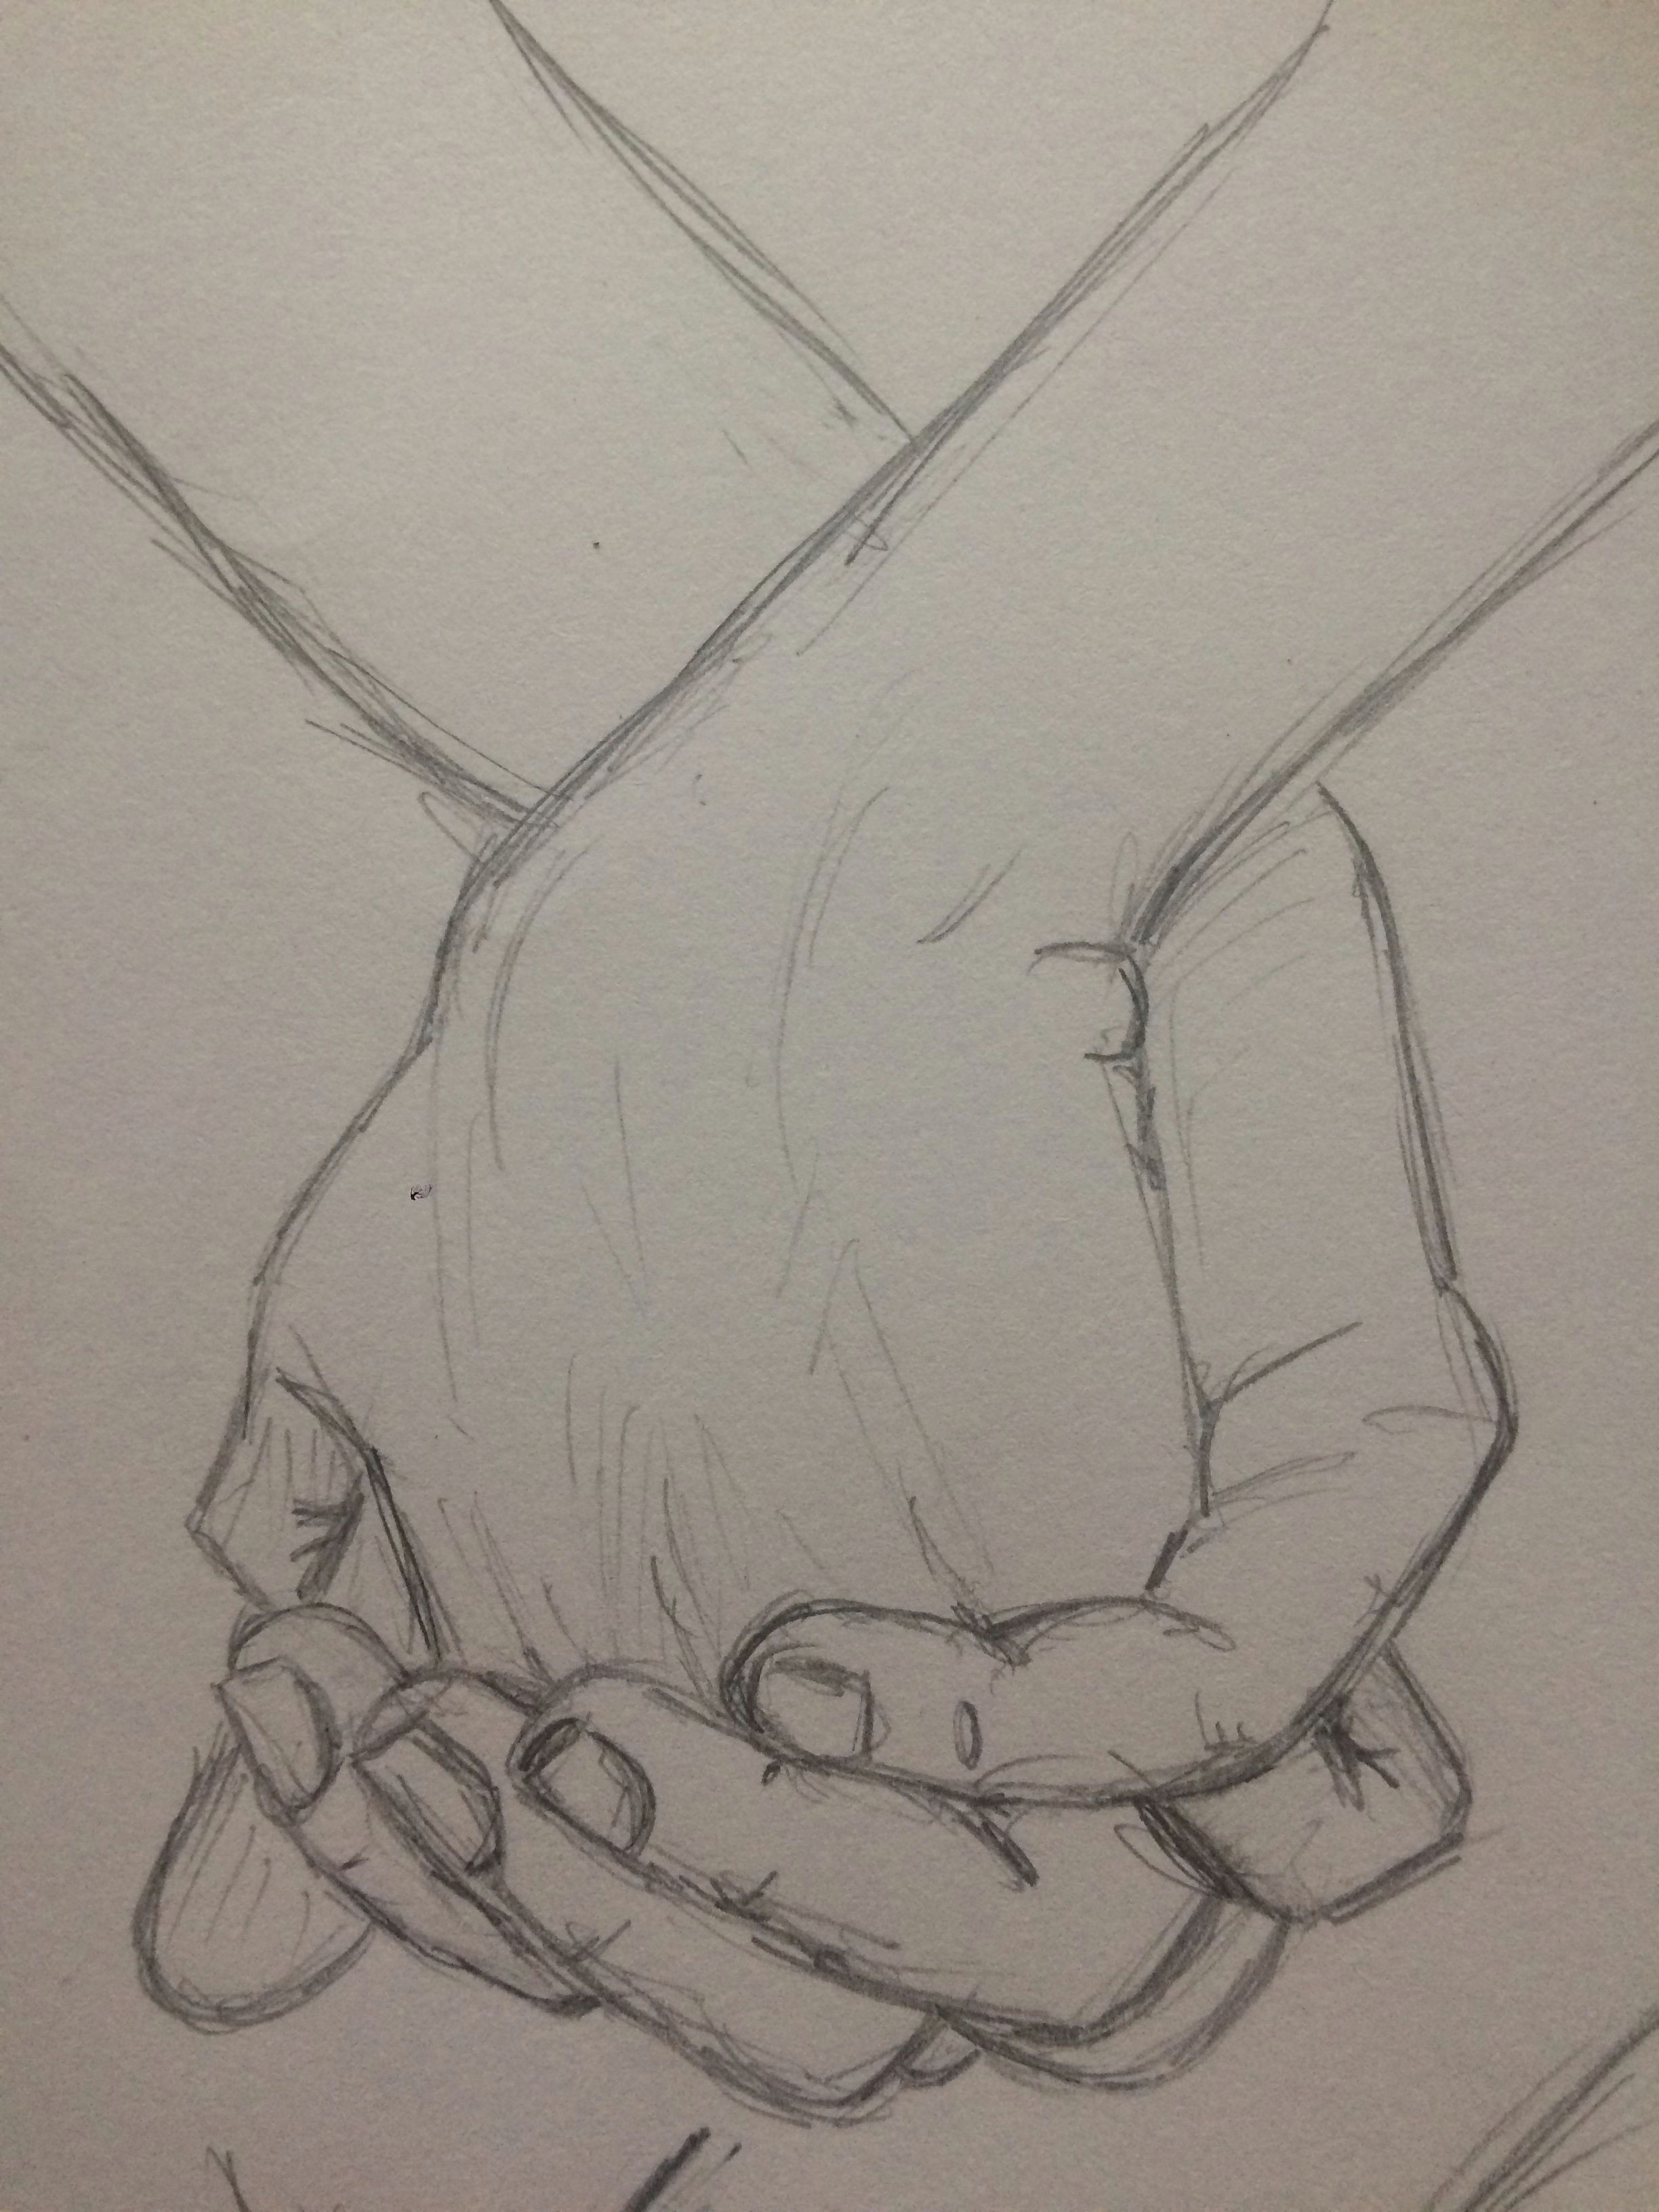 Drawing Of 2 Hands Holding Practice Sketch Holding Hands 2 Pinkishcoconut Practice by